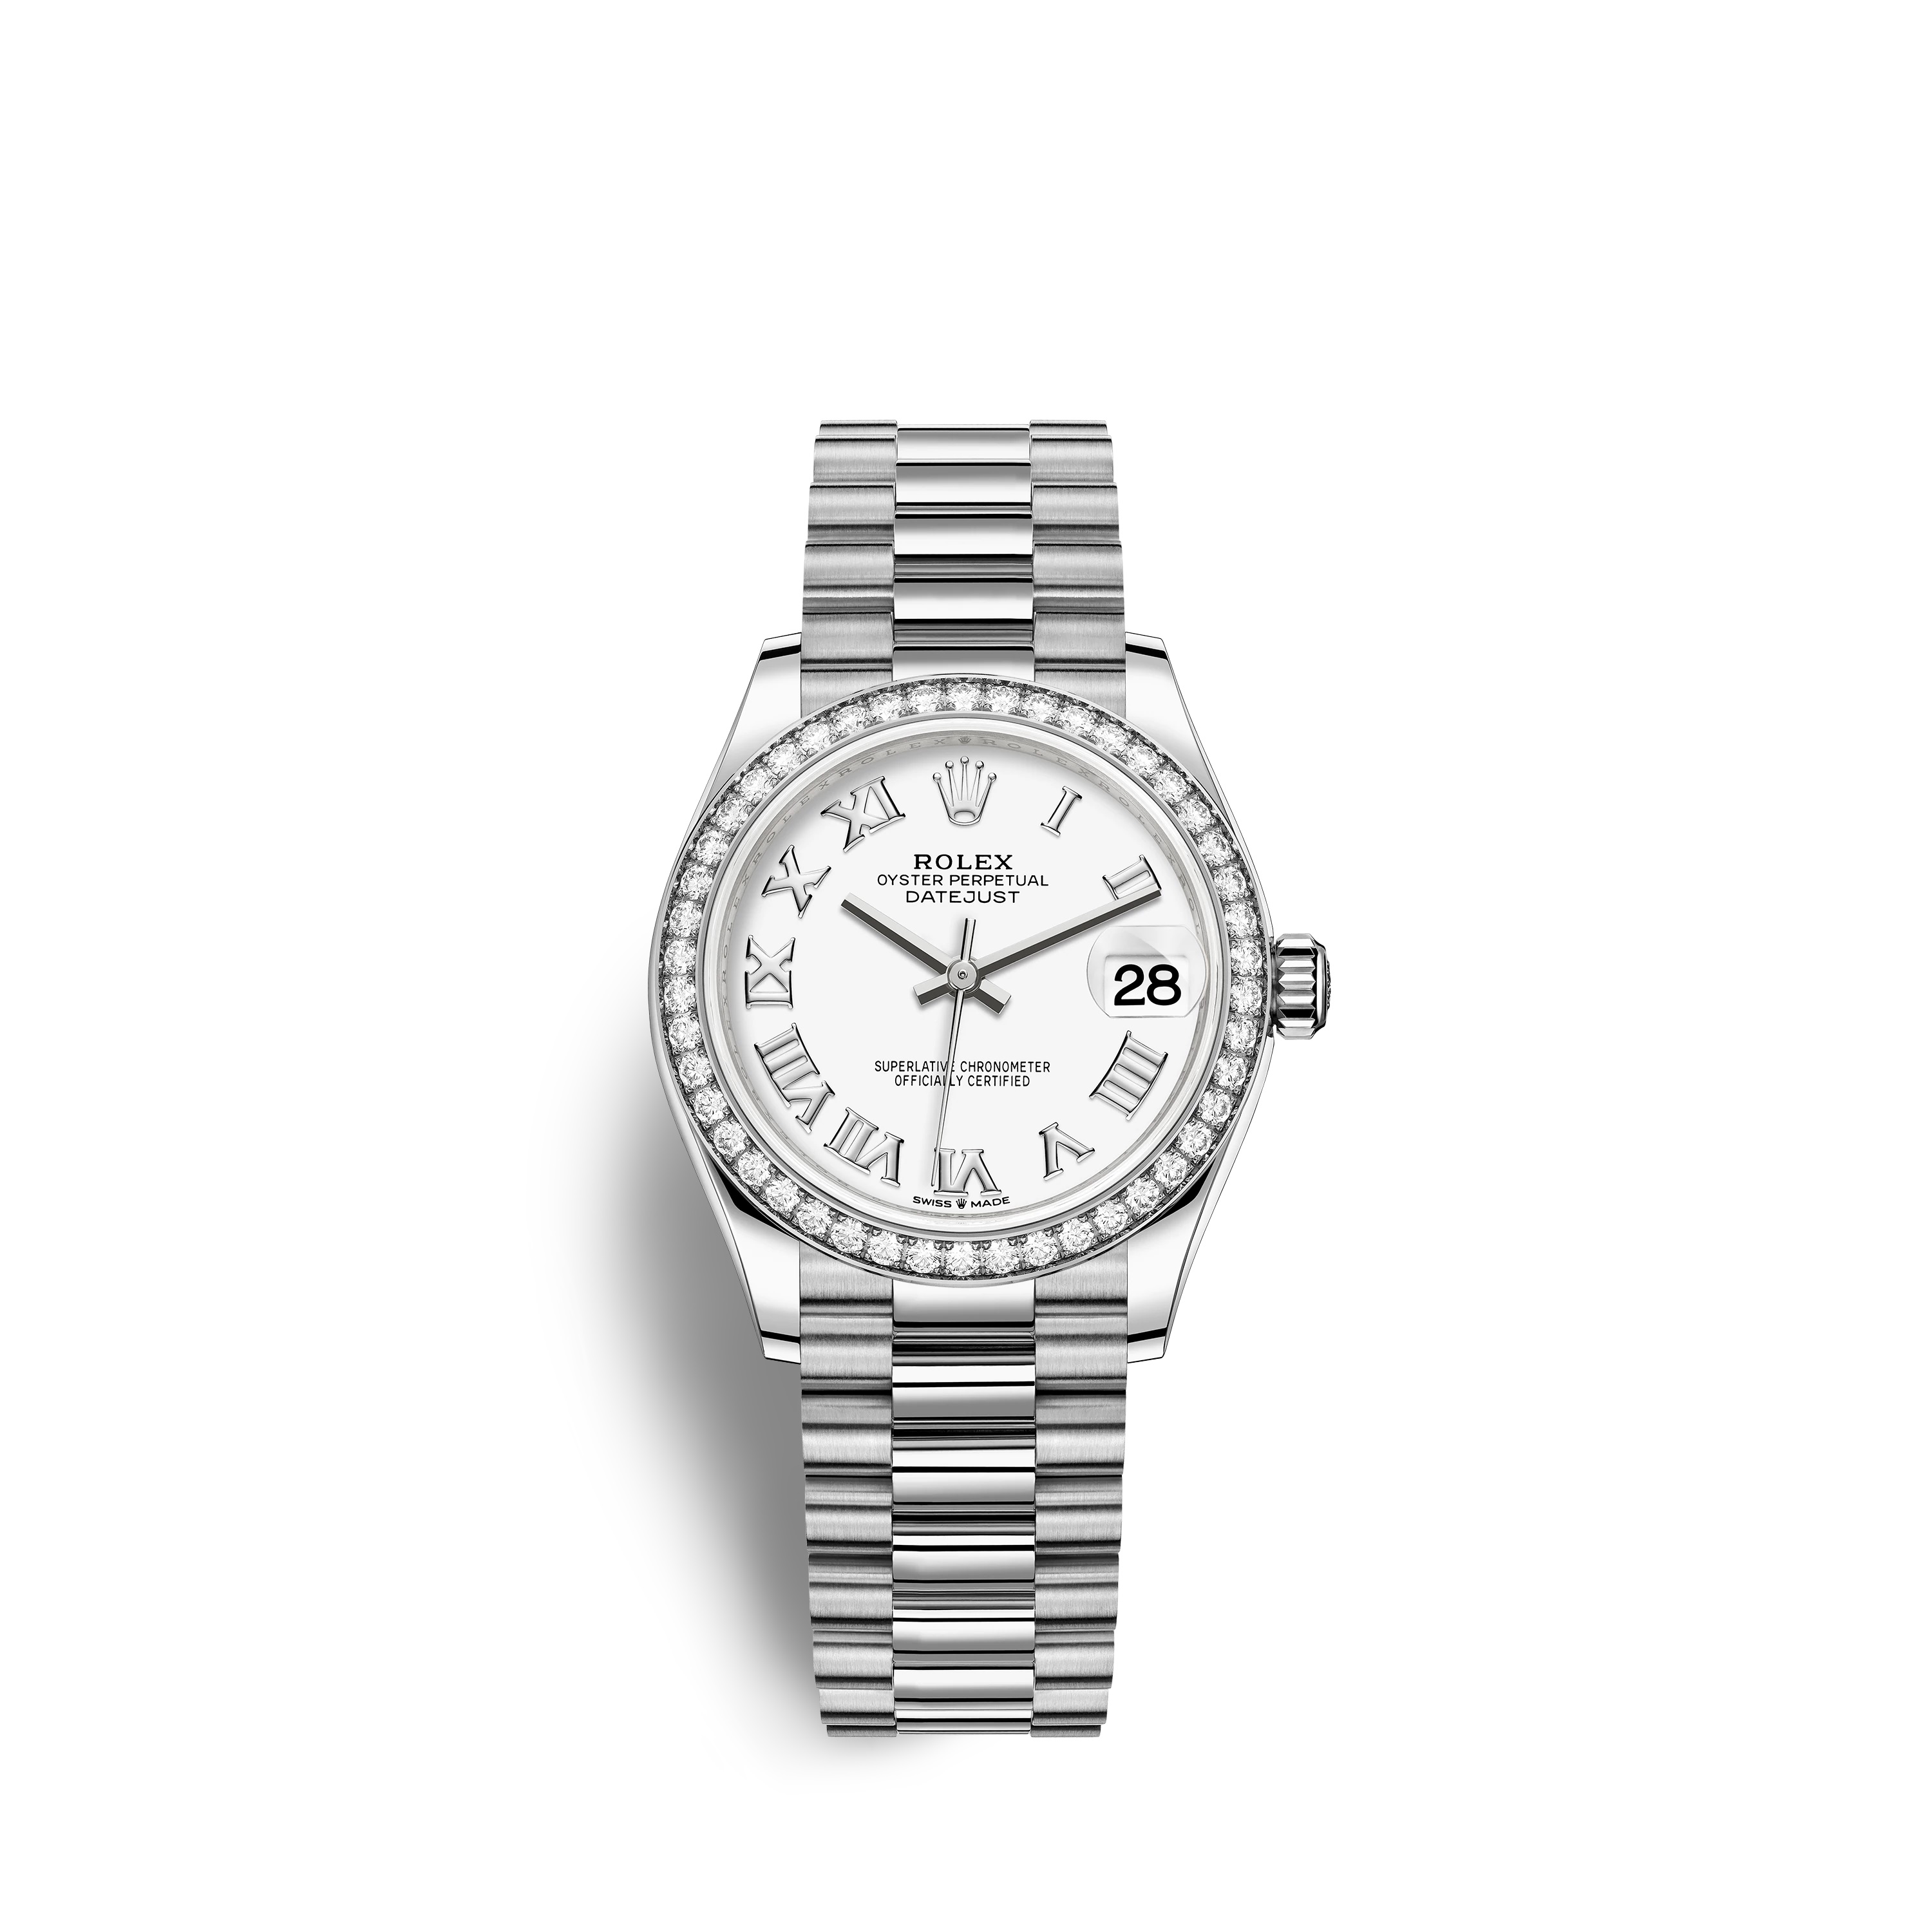 Datejust 31 278289RBR White Gold Watch (White)